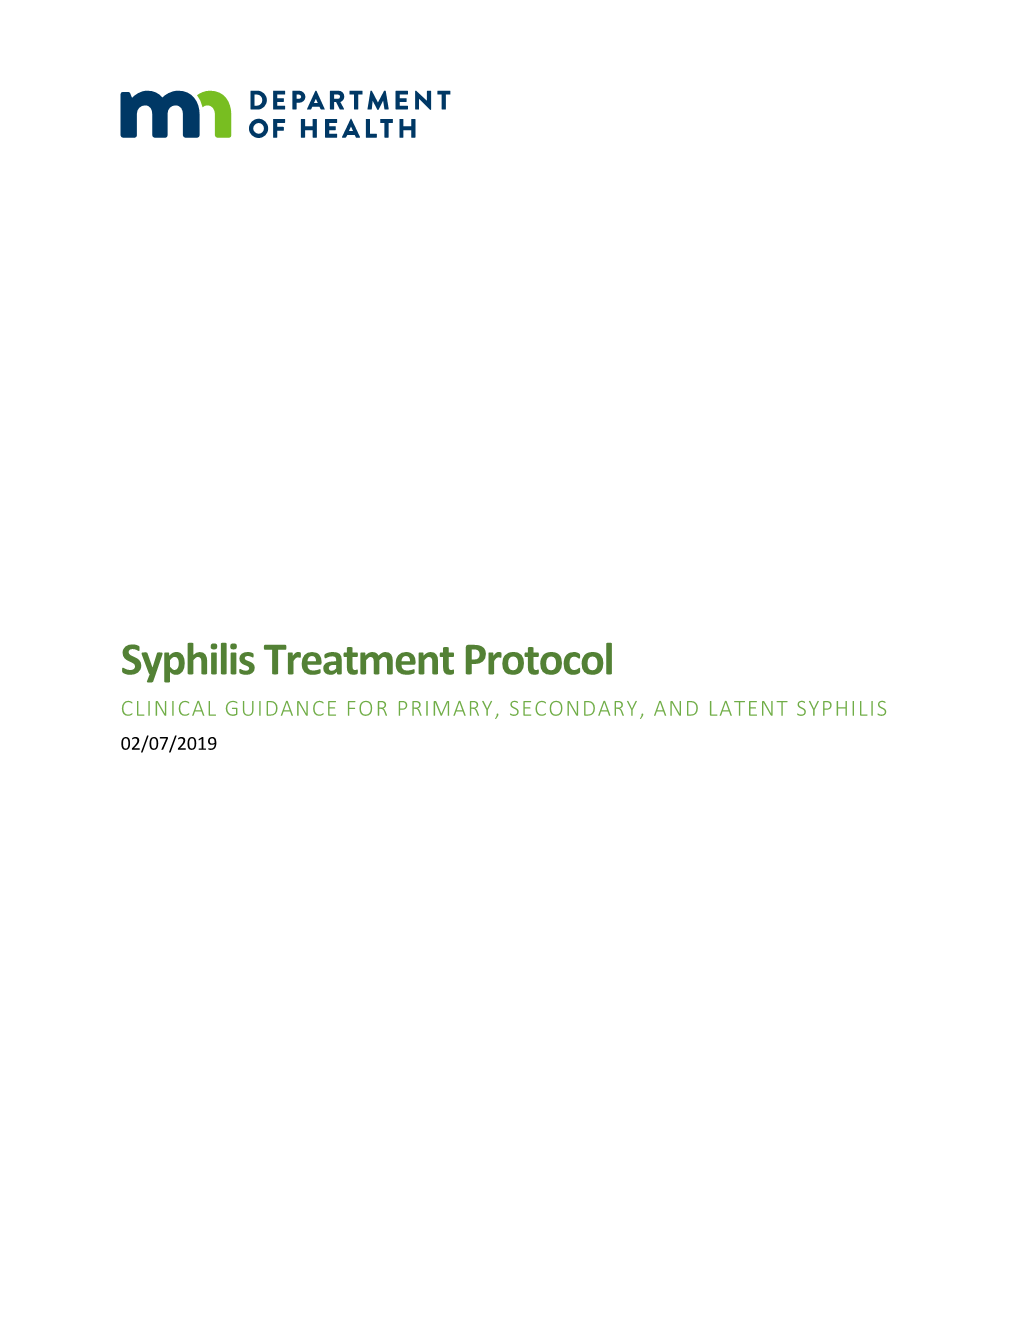 Syphilis Treatment Protocol: Clinical Guidance for Primary, Secondary